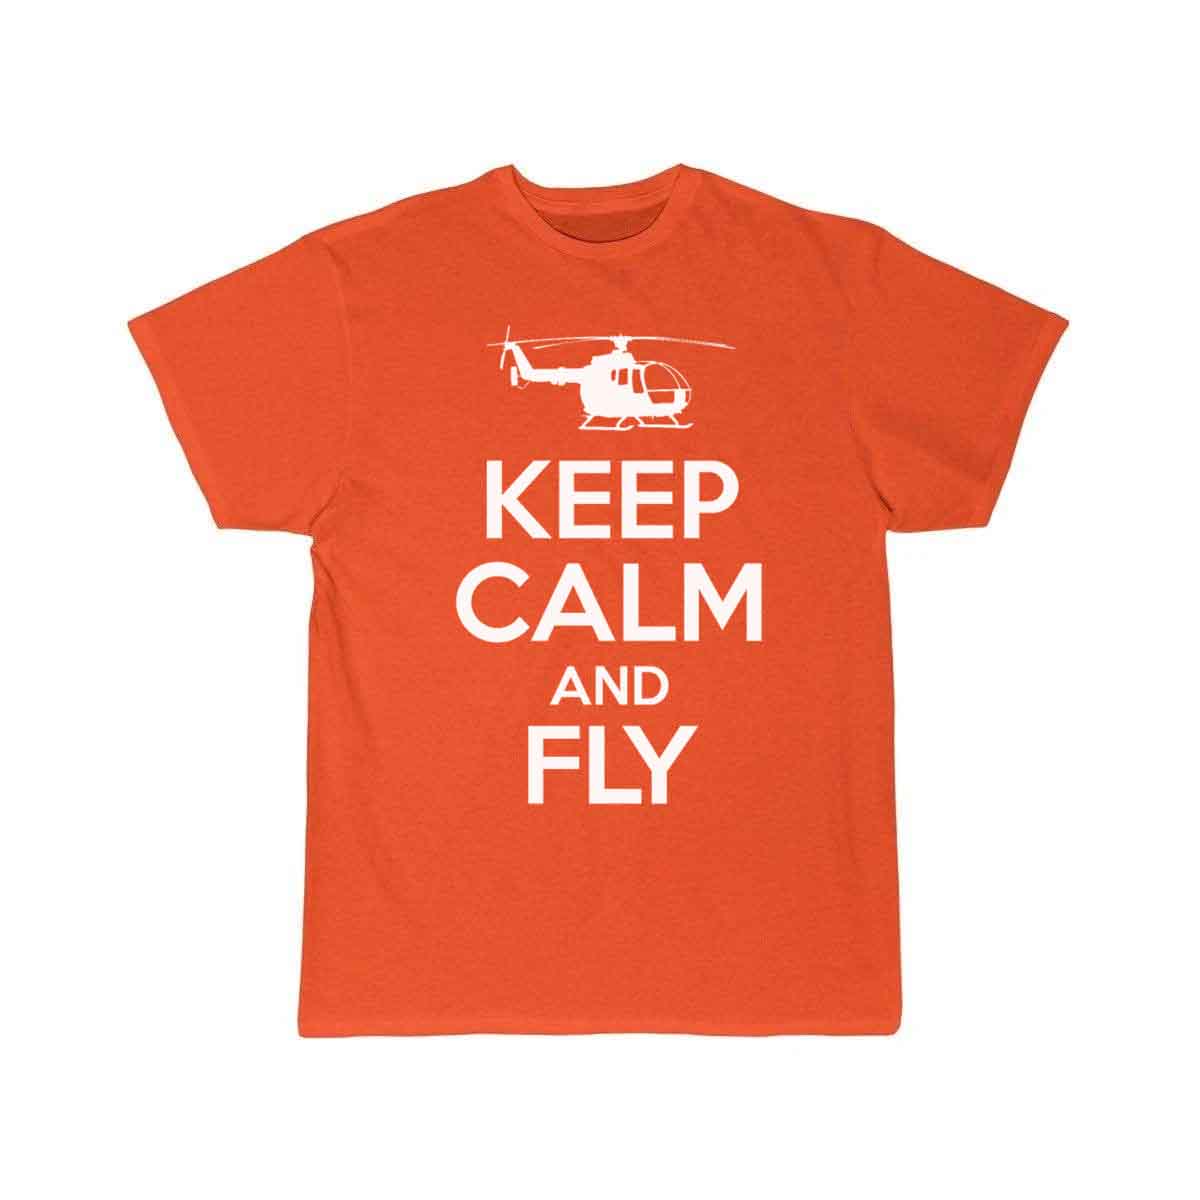 Keep calm and fly rc helicopters - helo pilot T-SHIRT THE AV8R